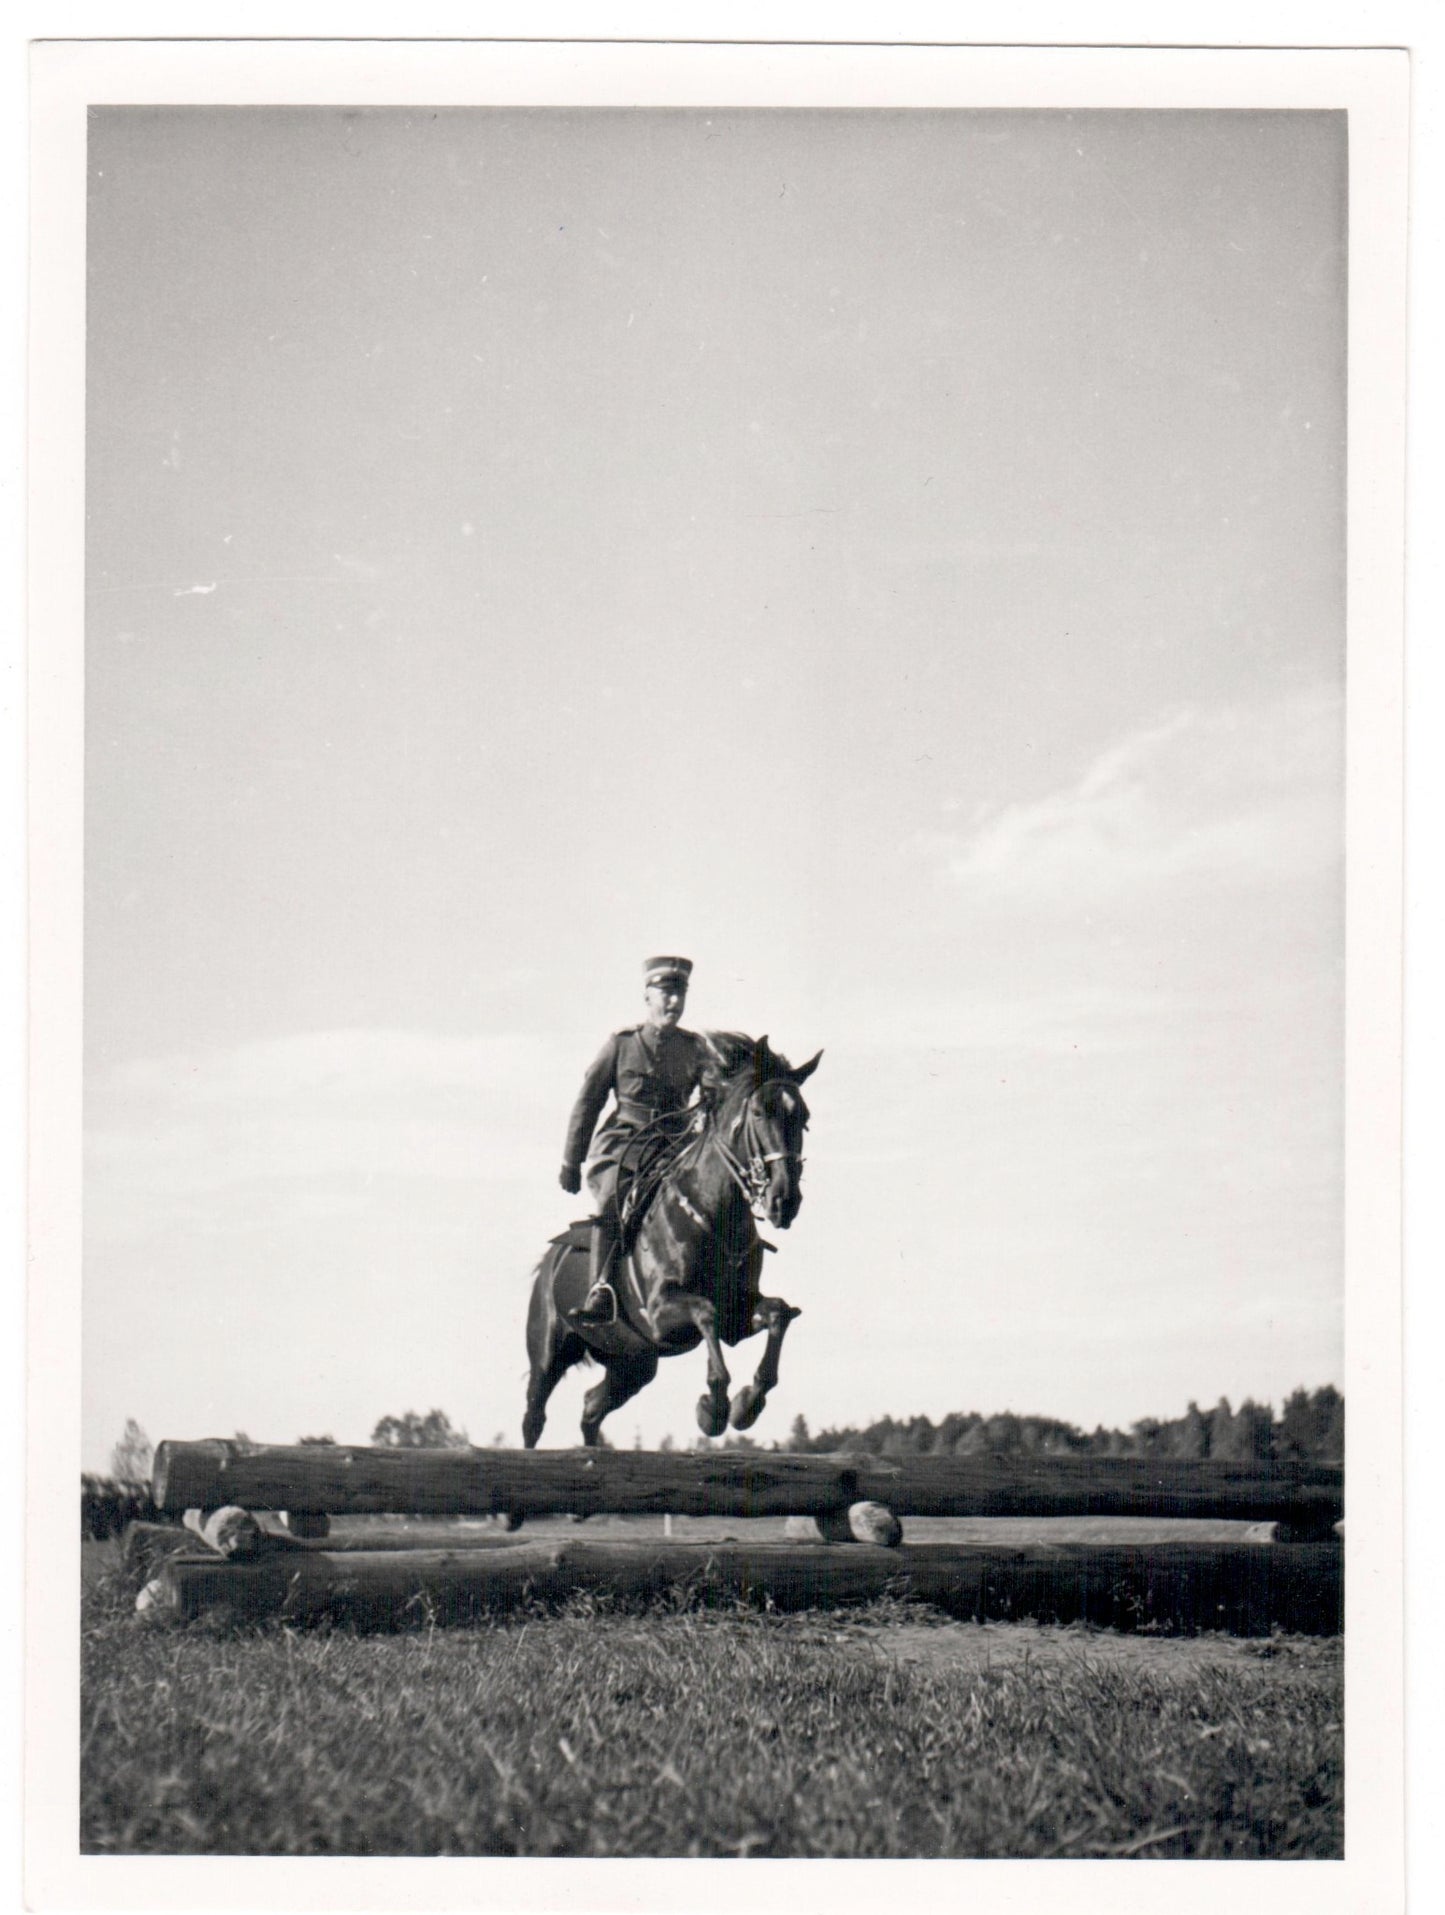 Vintage Photography - Equestrian Sports - Solider - Officer on a Horse - Sweden